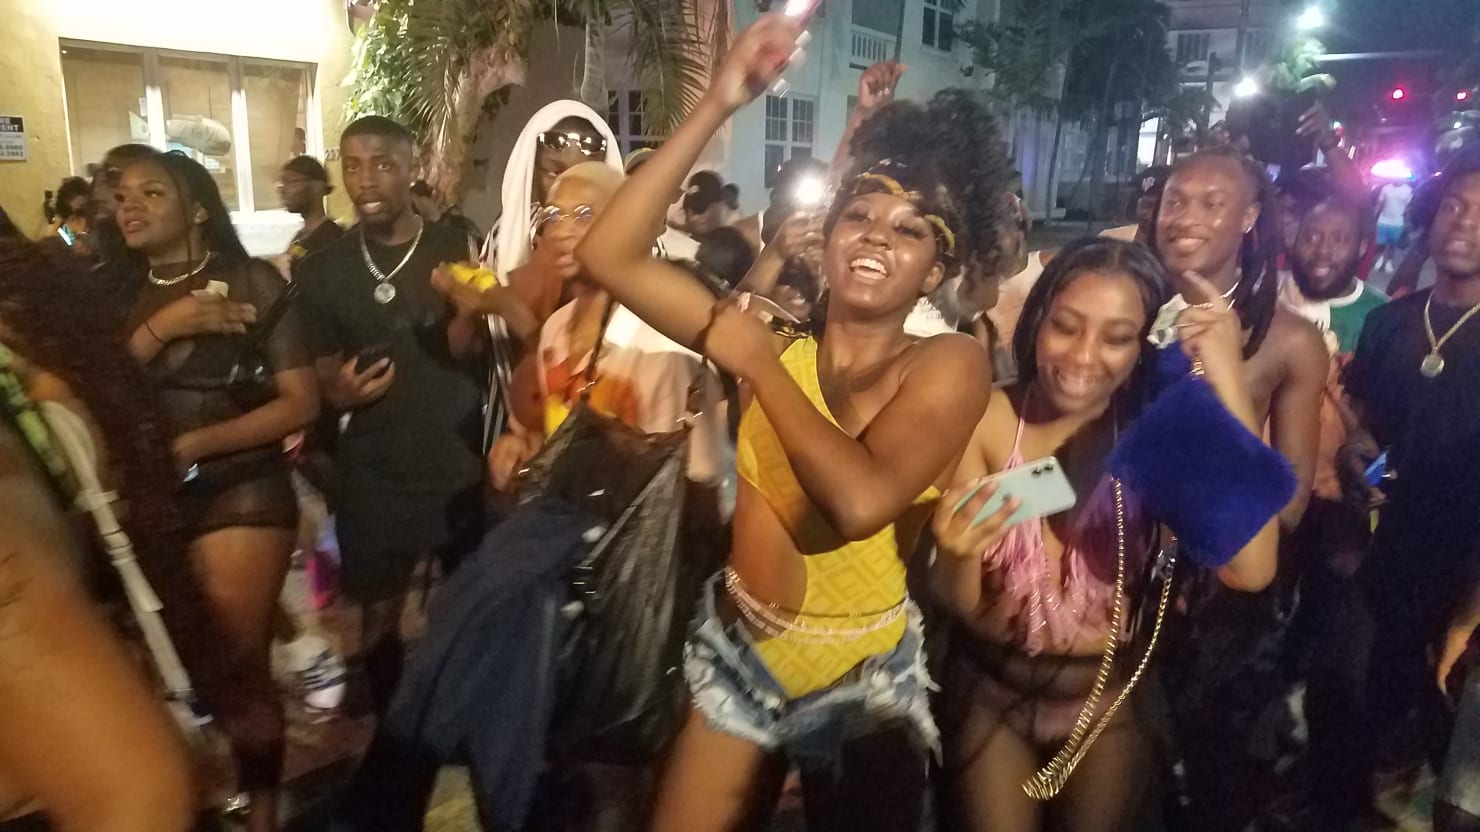 Miami Beach Freaks Out Over Massive Spring Break Crowds, Declares State